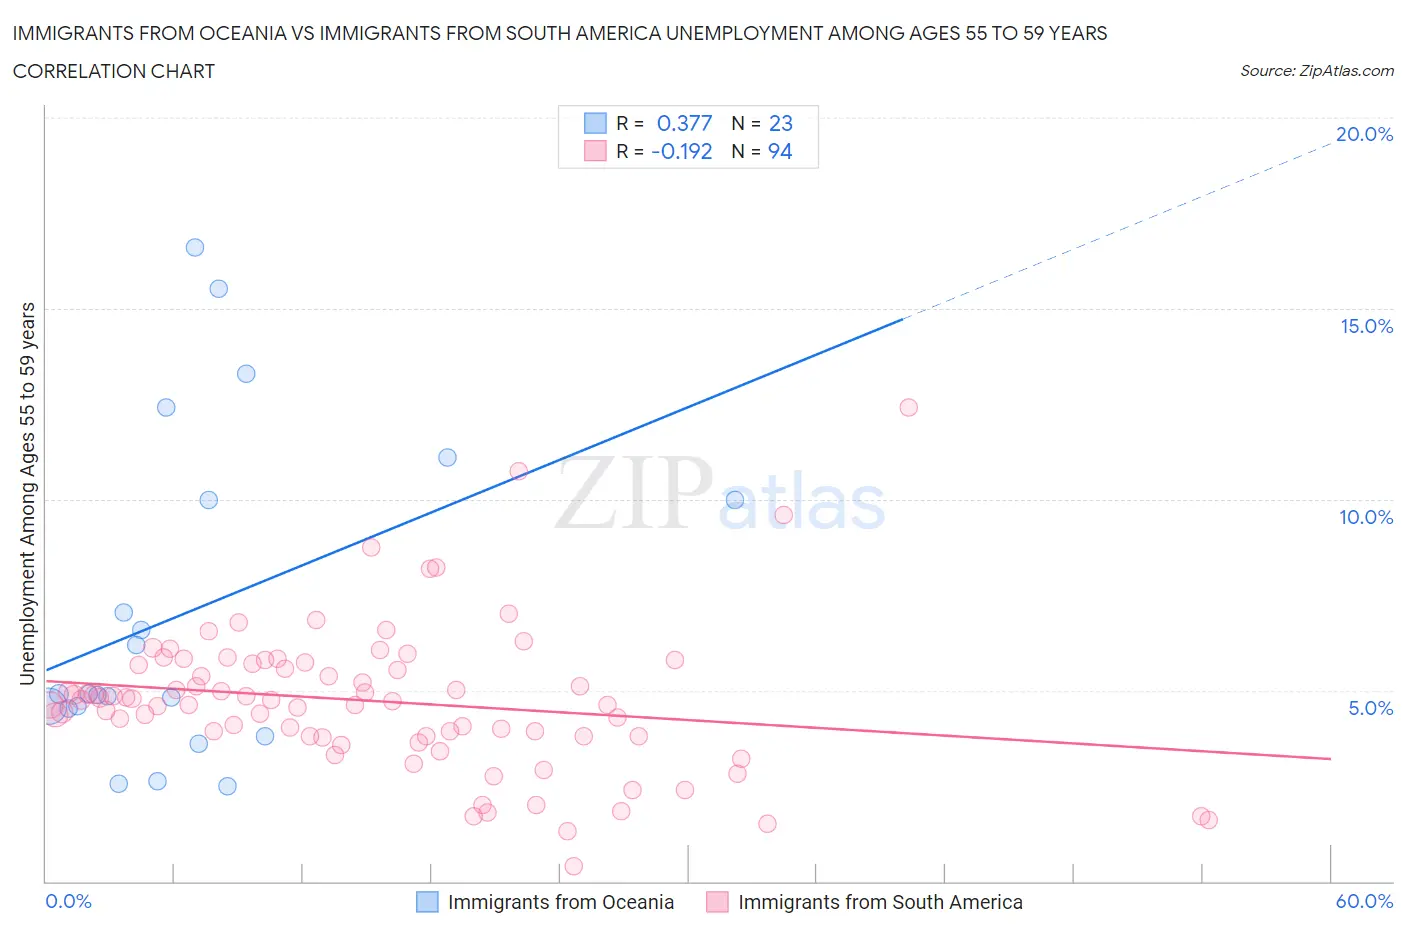 Immigrants from Oceania vs Immigrants from South America Unemployment Among Ages 55 to 59 years